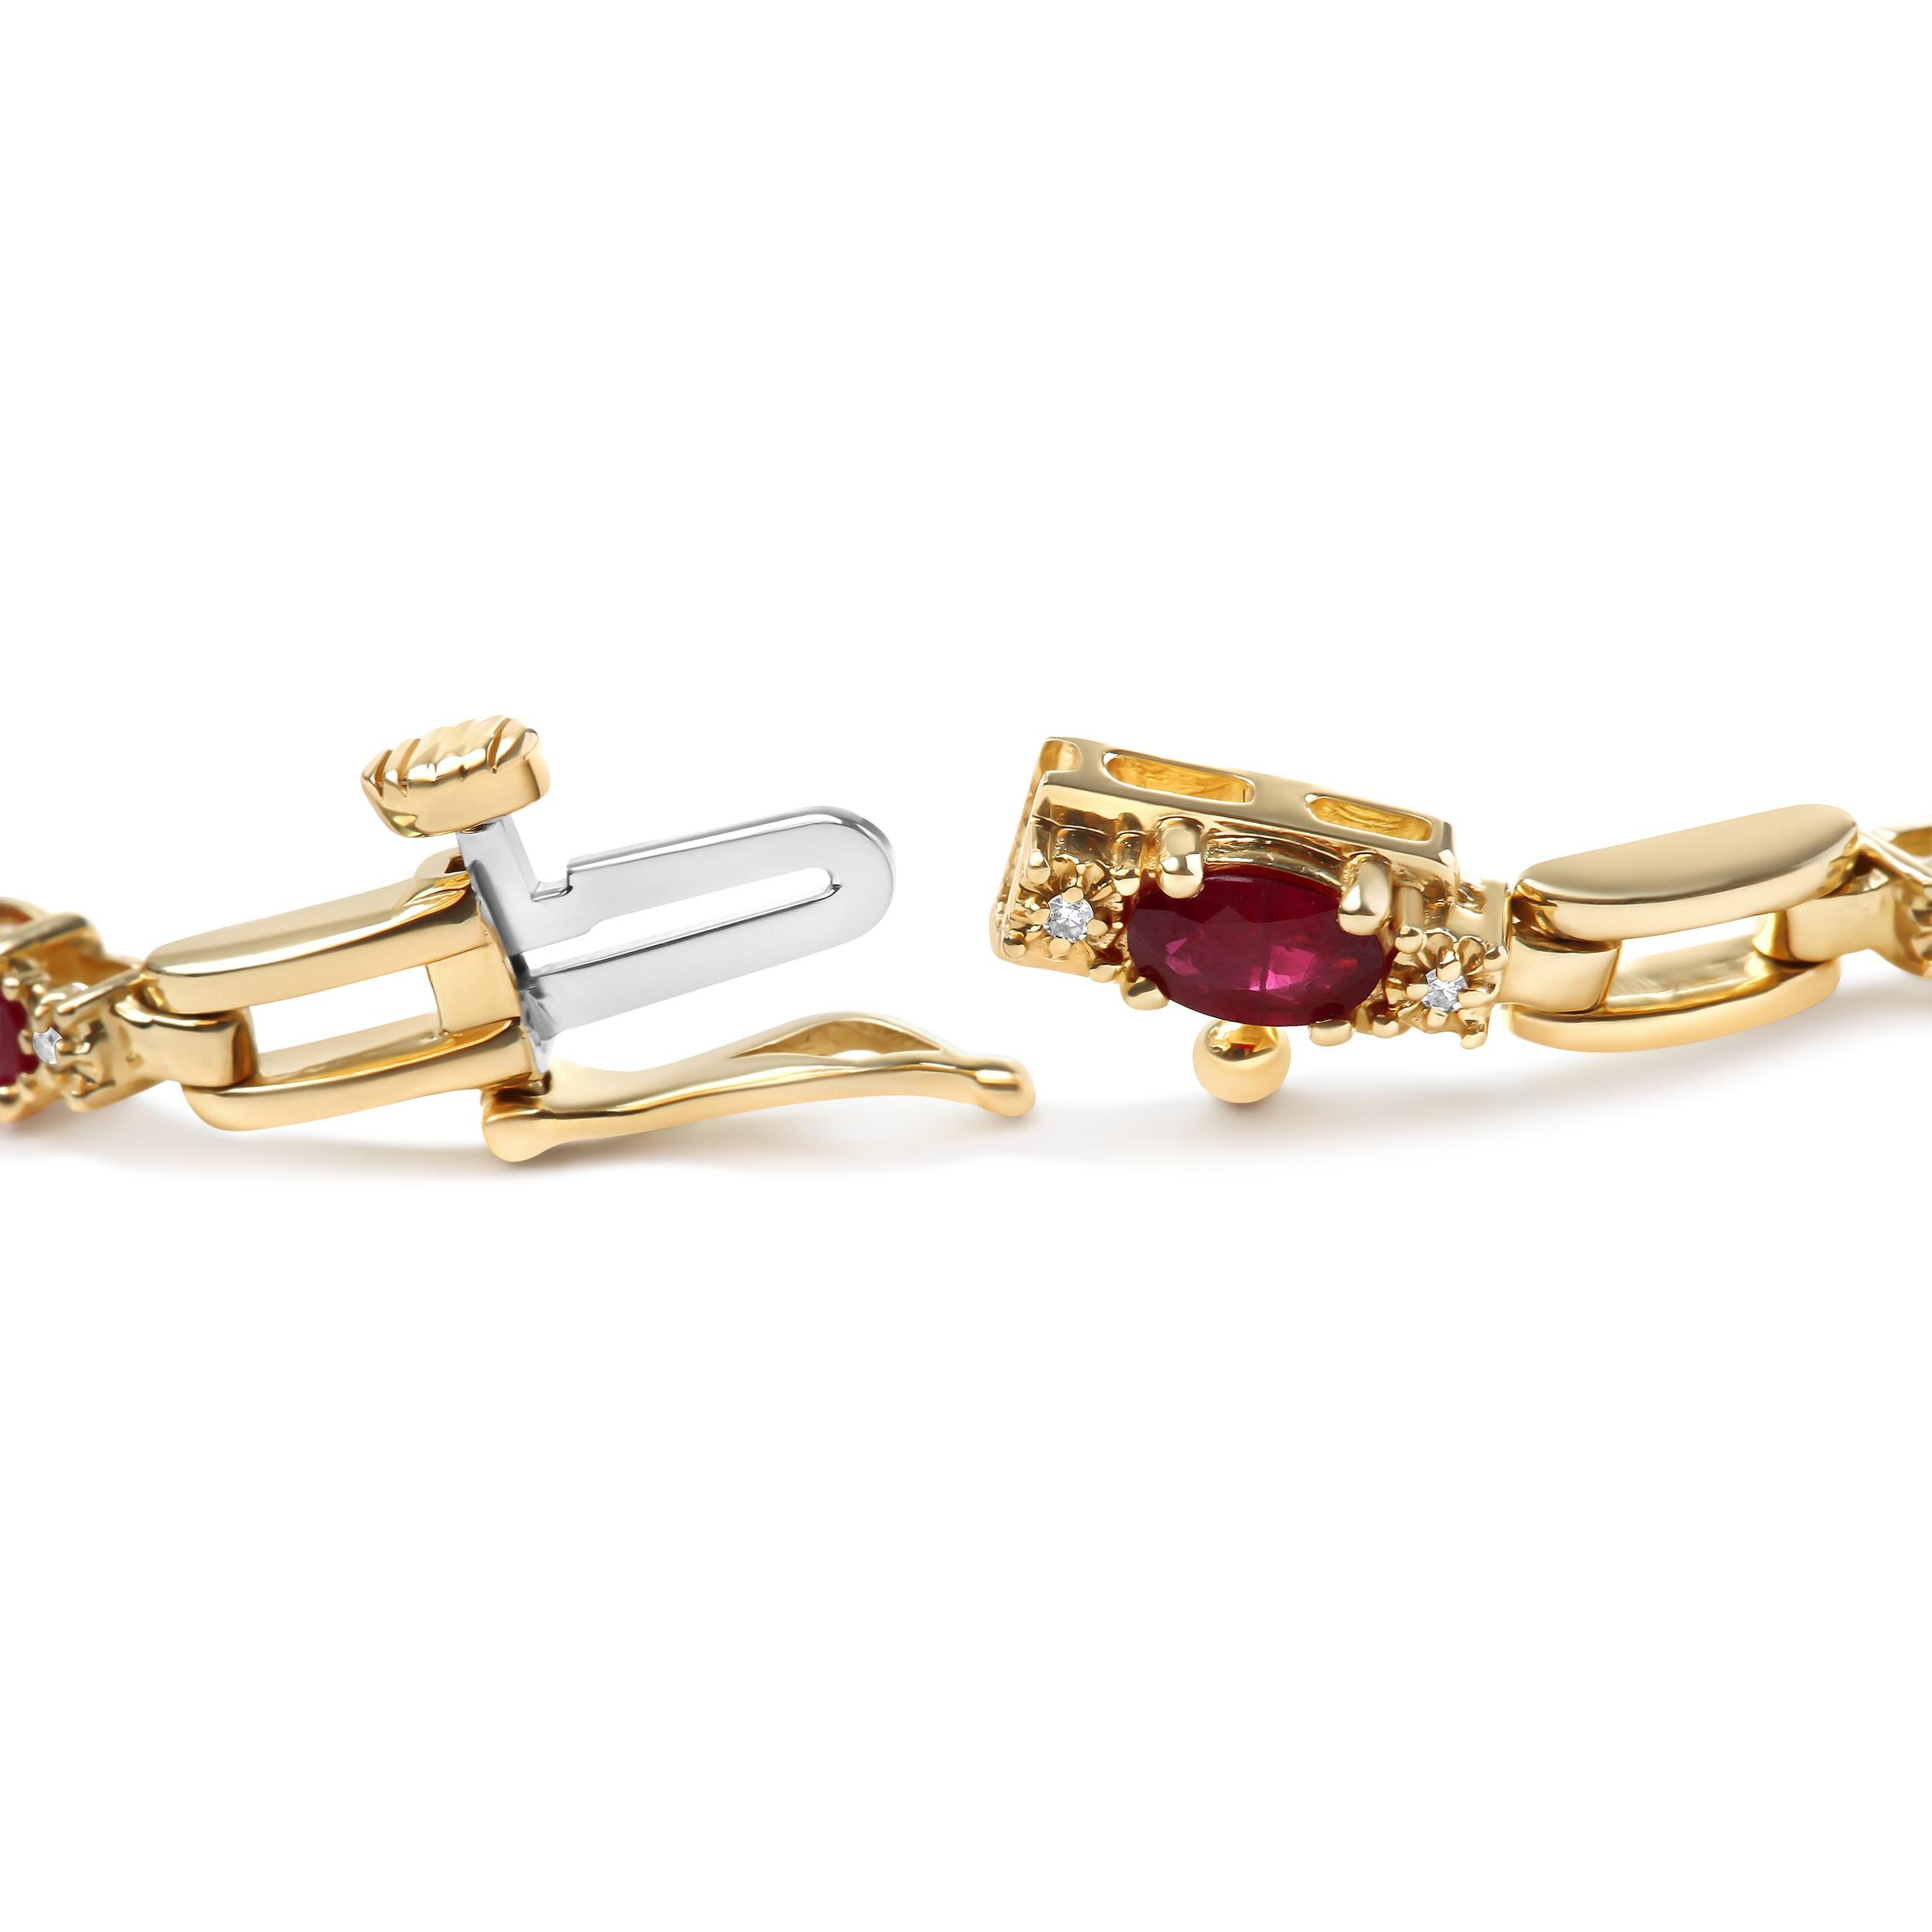 Behold the ultimate symbol of love and beauty in this exquisite oval Ruby and Diamond Bar Prong Set Bracelet. Dazzling with 11 natural heat-treated red rubies, each delicately crafted in a prong setting, this stunning piece of jewelry radiates